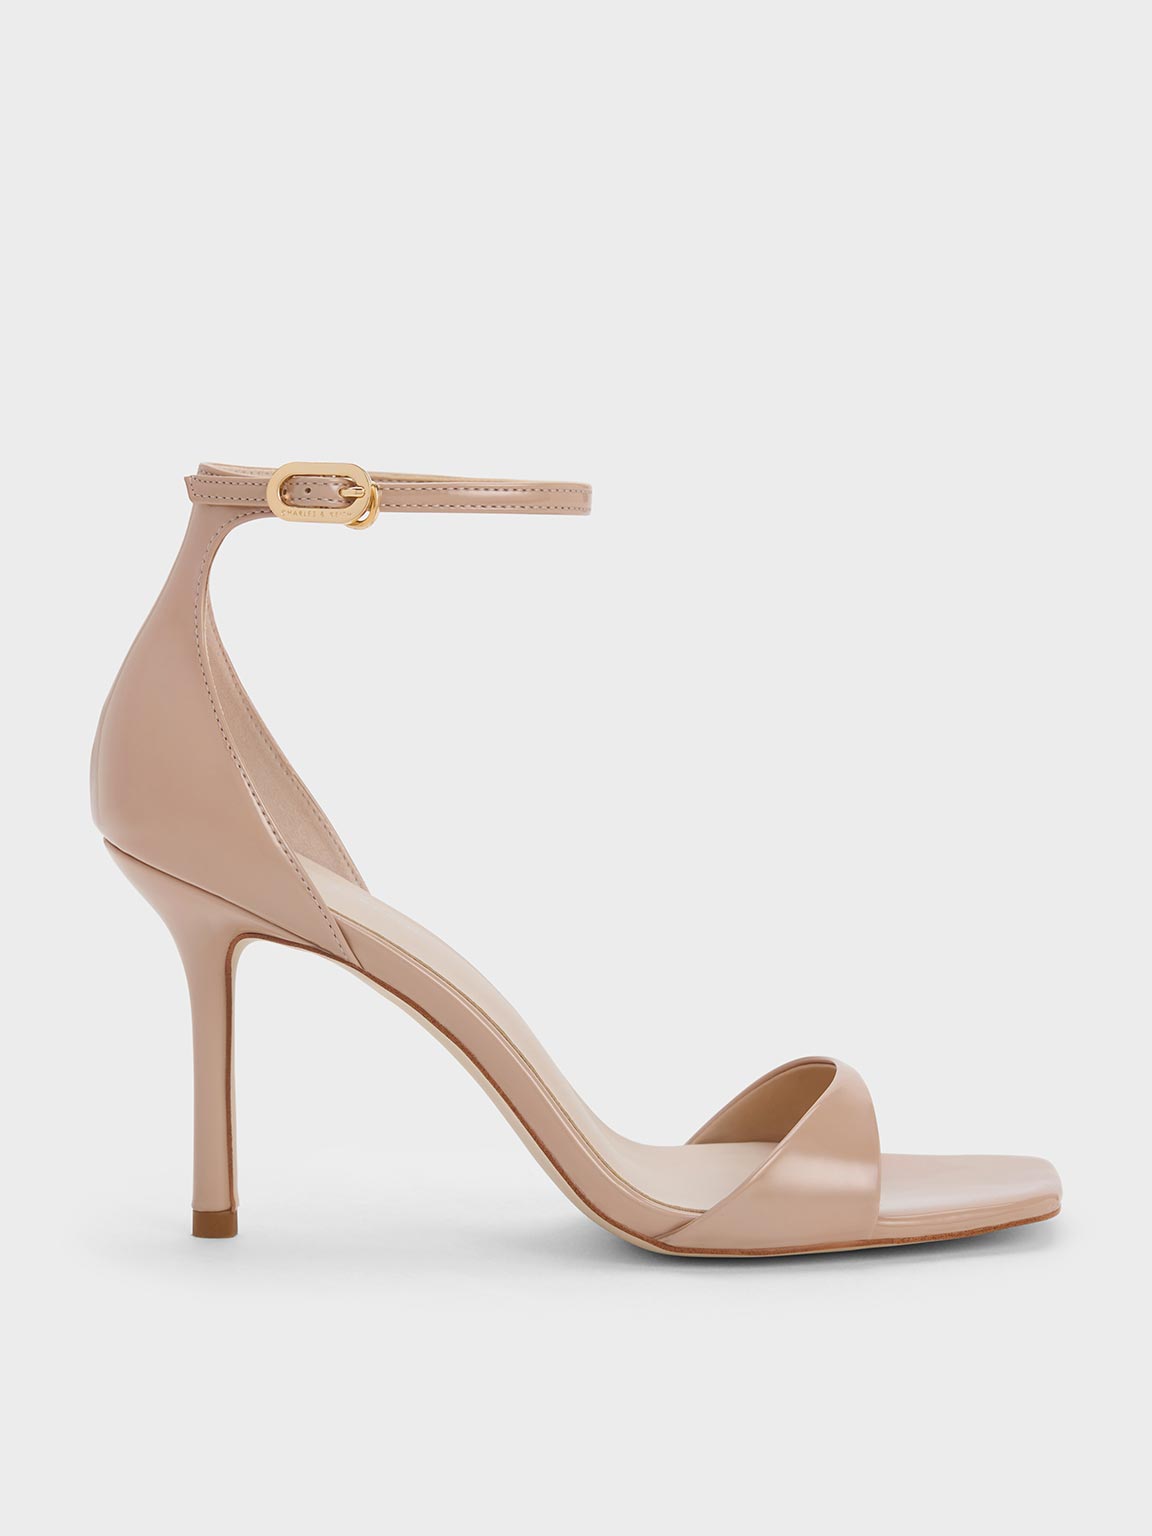 Charles & Keith - Women's Patent Ankle Strap Heeled Sandals, Nude, US 6